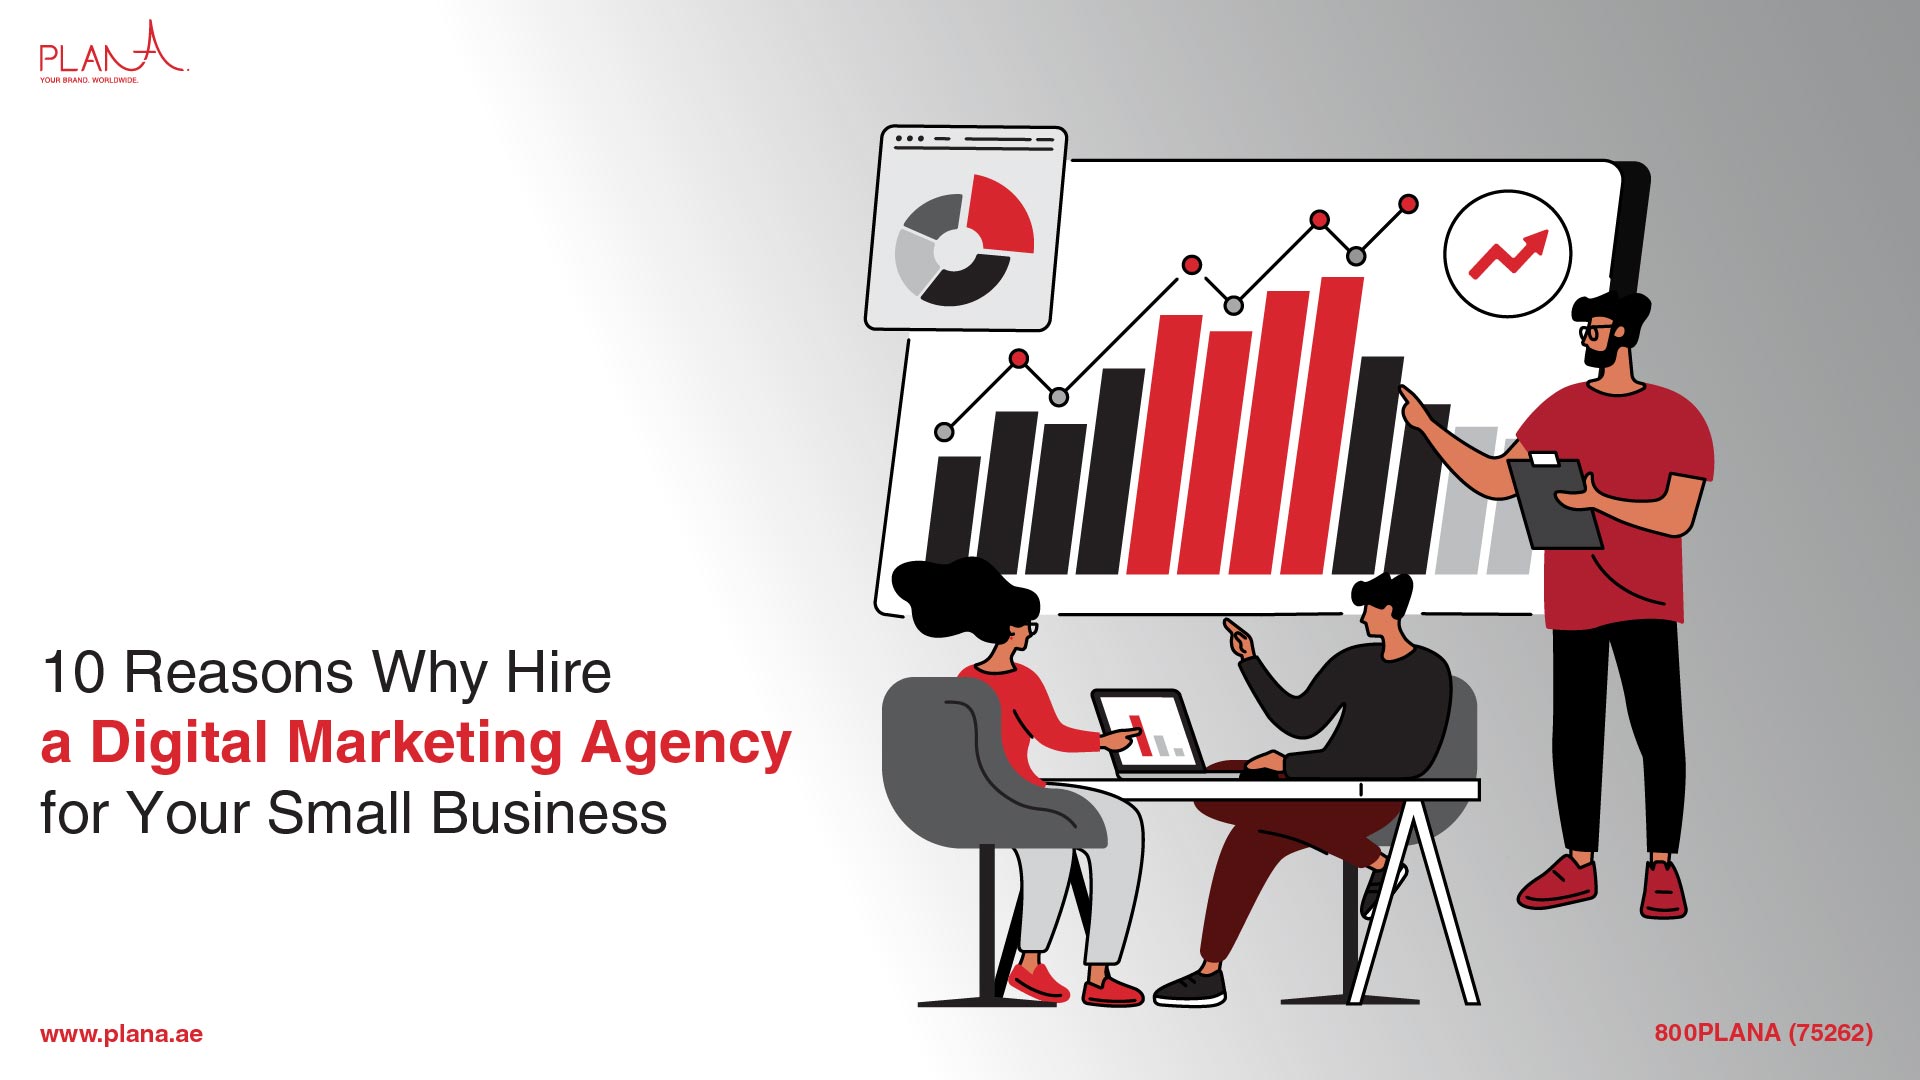 10 Reasons Why Hire a Digital Marketing Agency for Your Small Business